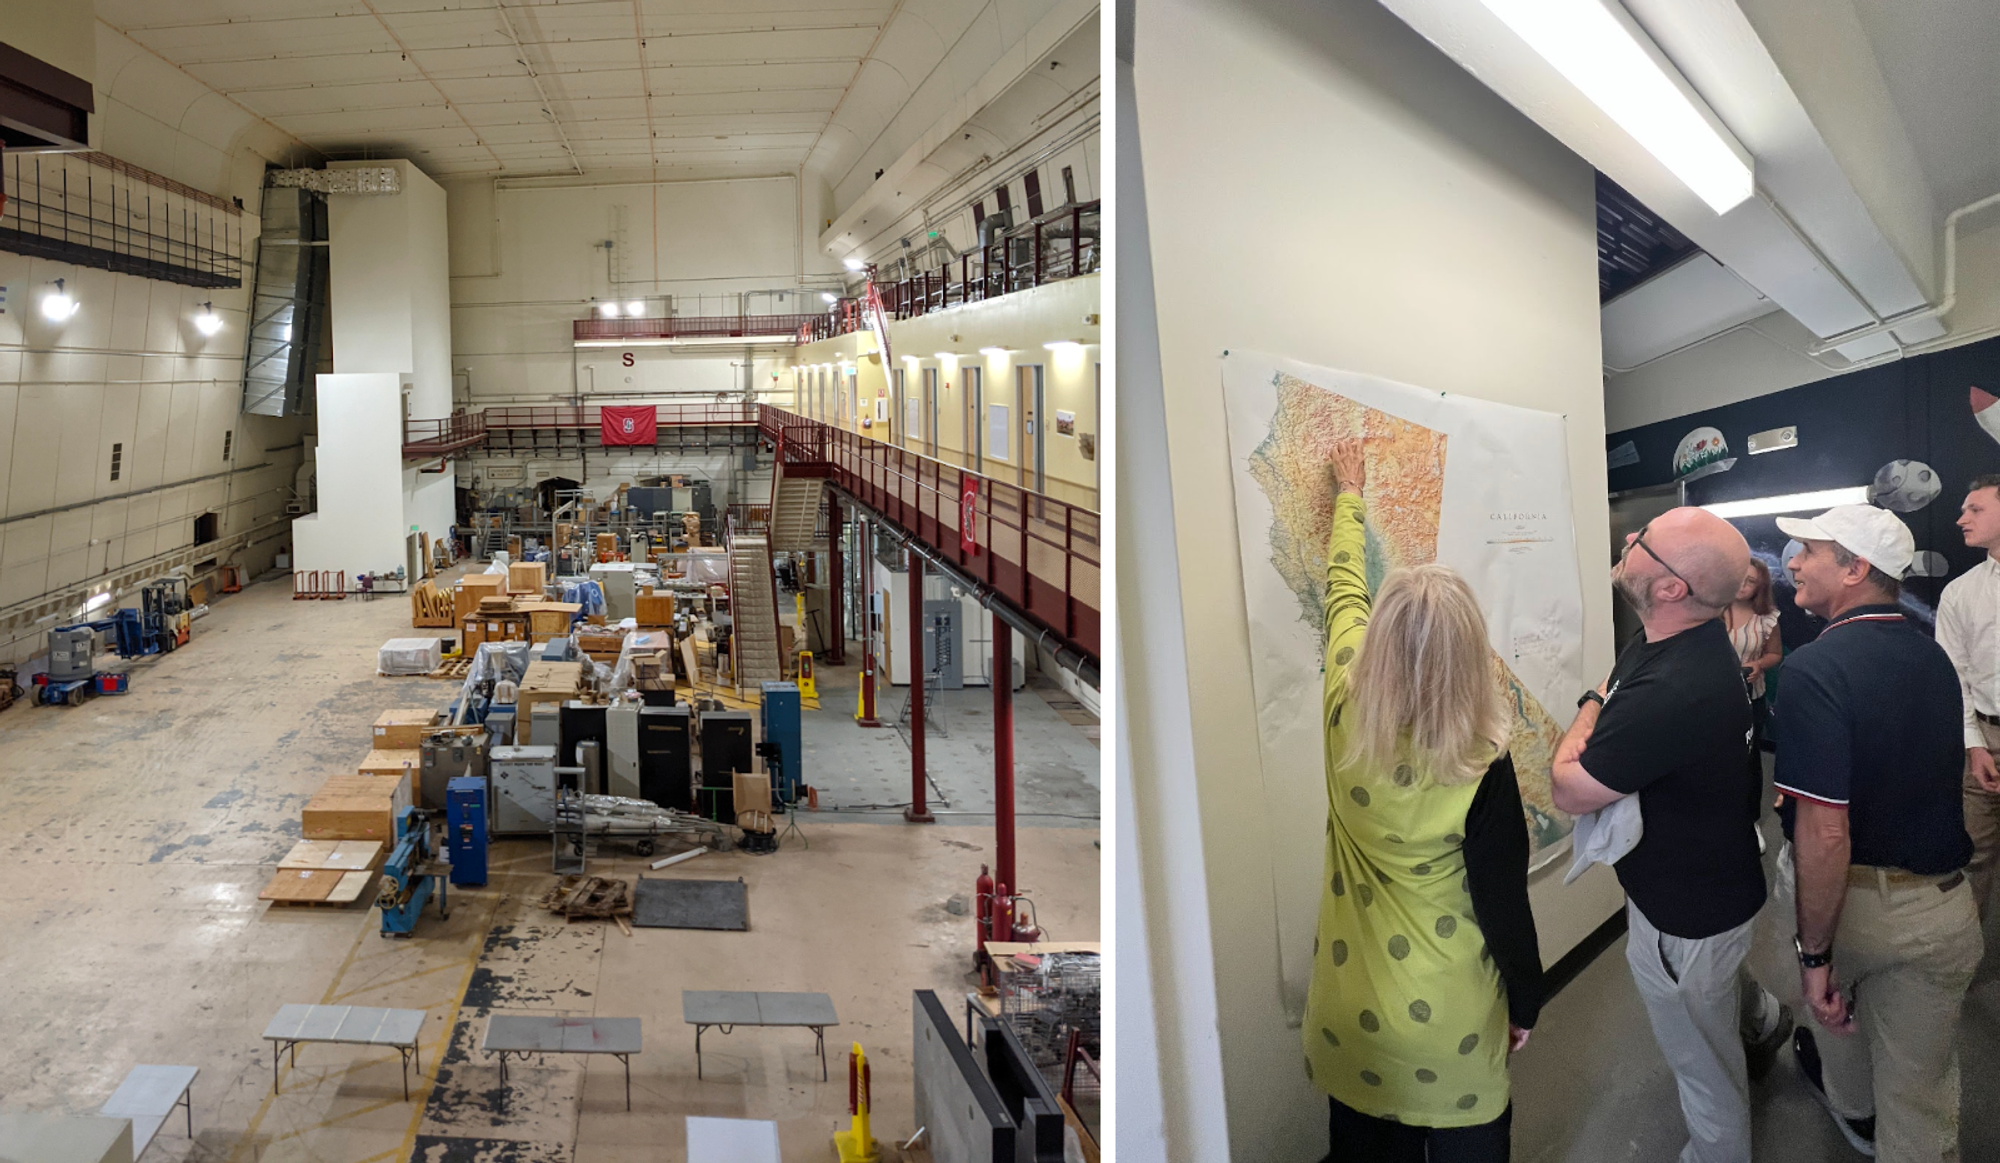 The SSI workspace, which was previously the end station of the nearby particle accelerator. Decorated along its halls are maps of where past SSI balloon missions have flown, murals painted by former SSI students, and photos of our favorite SSI memories.